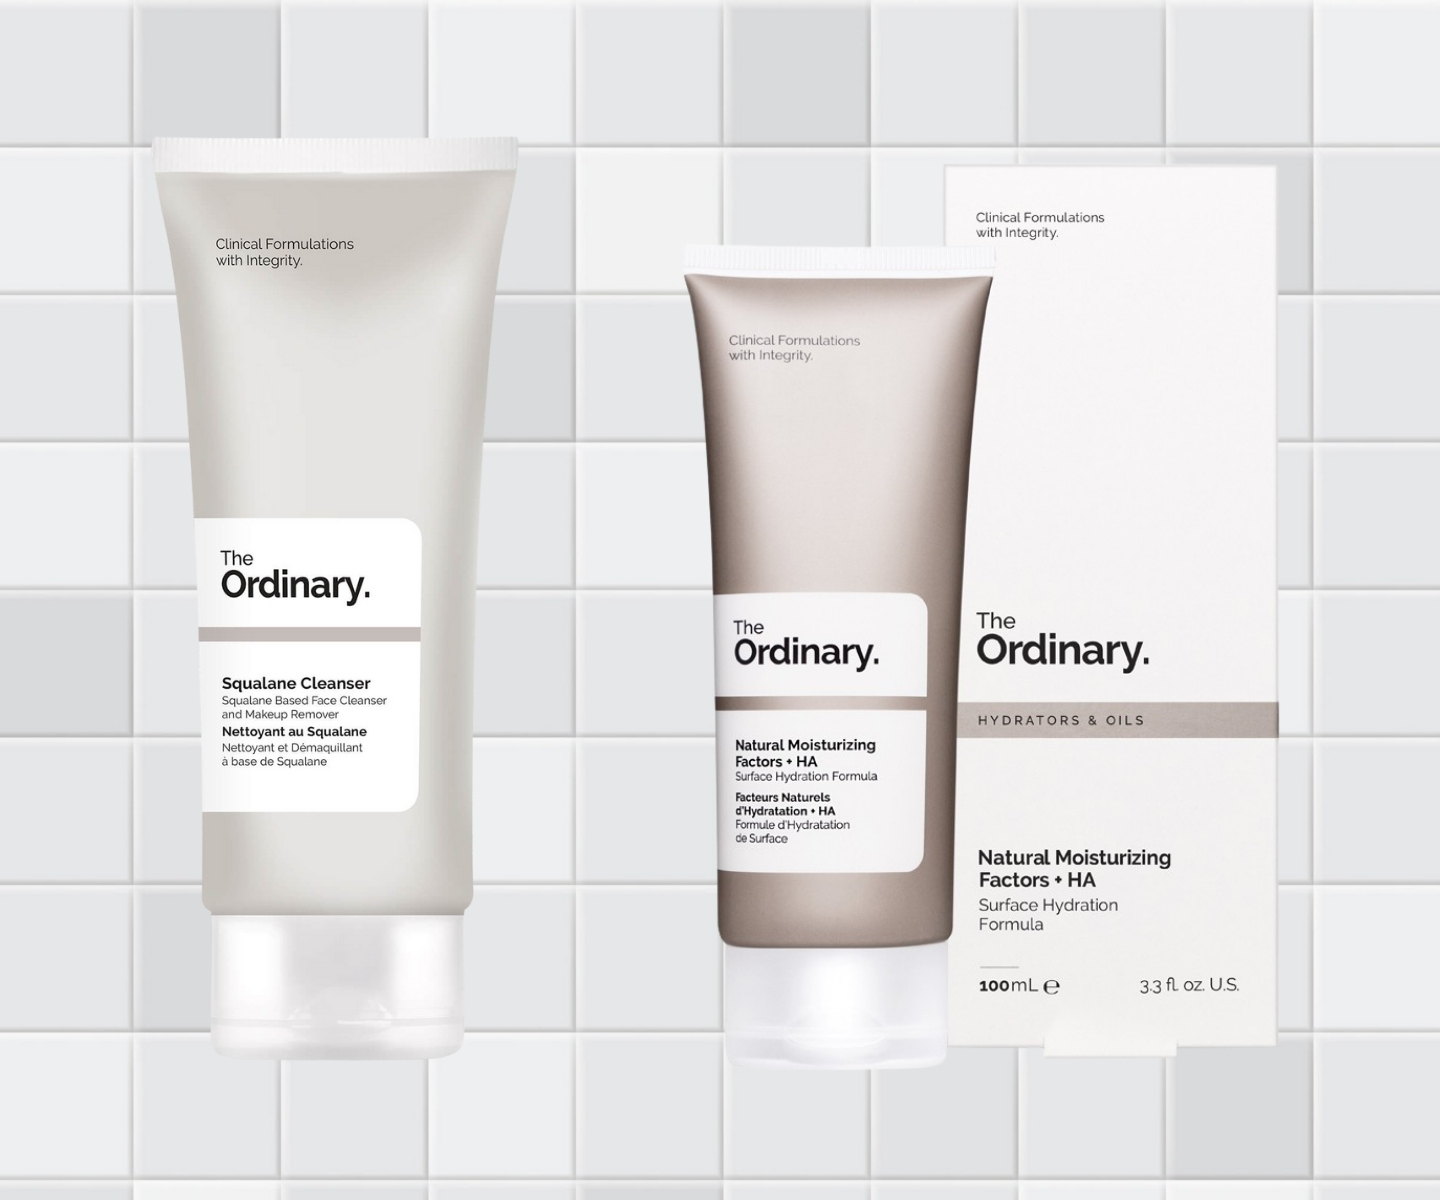 The Ordinary Products for Sensitive Skin